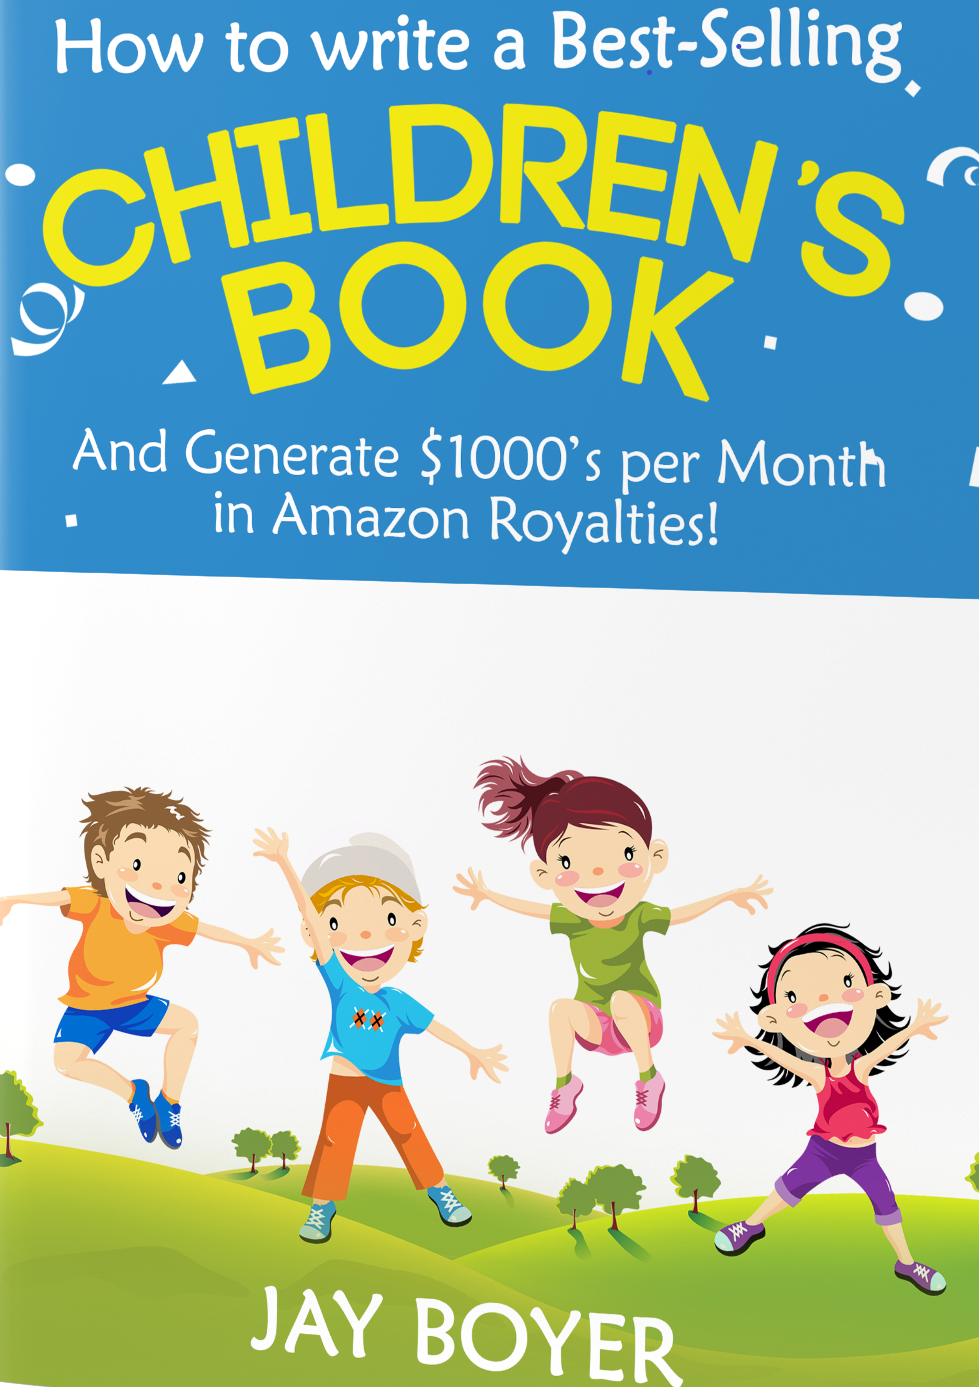 Get Expert Tips To Create A Bestselling Kids Picture E-Book With This Free Guide